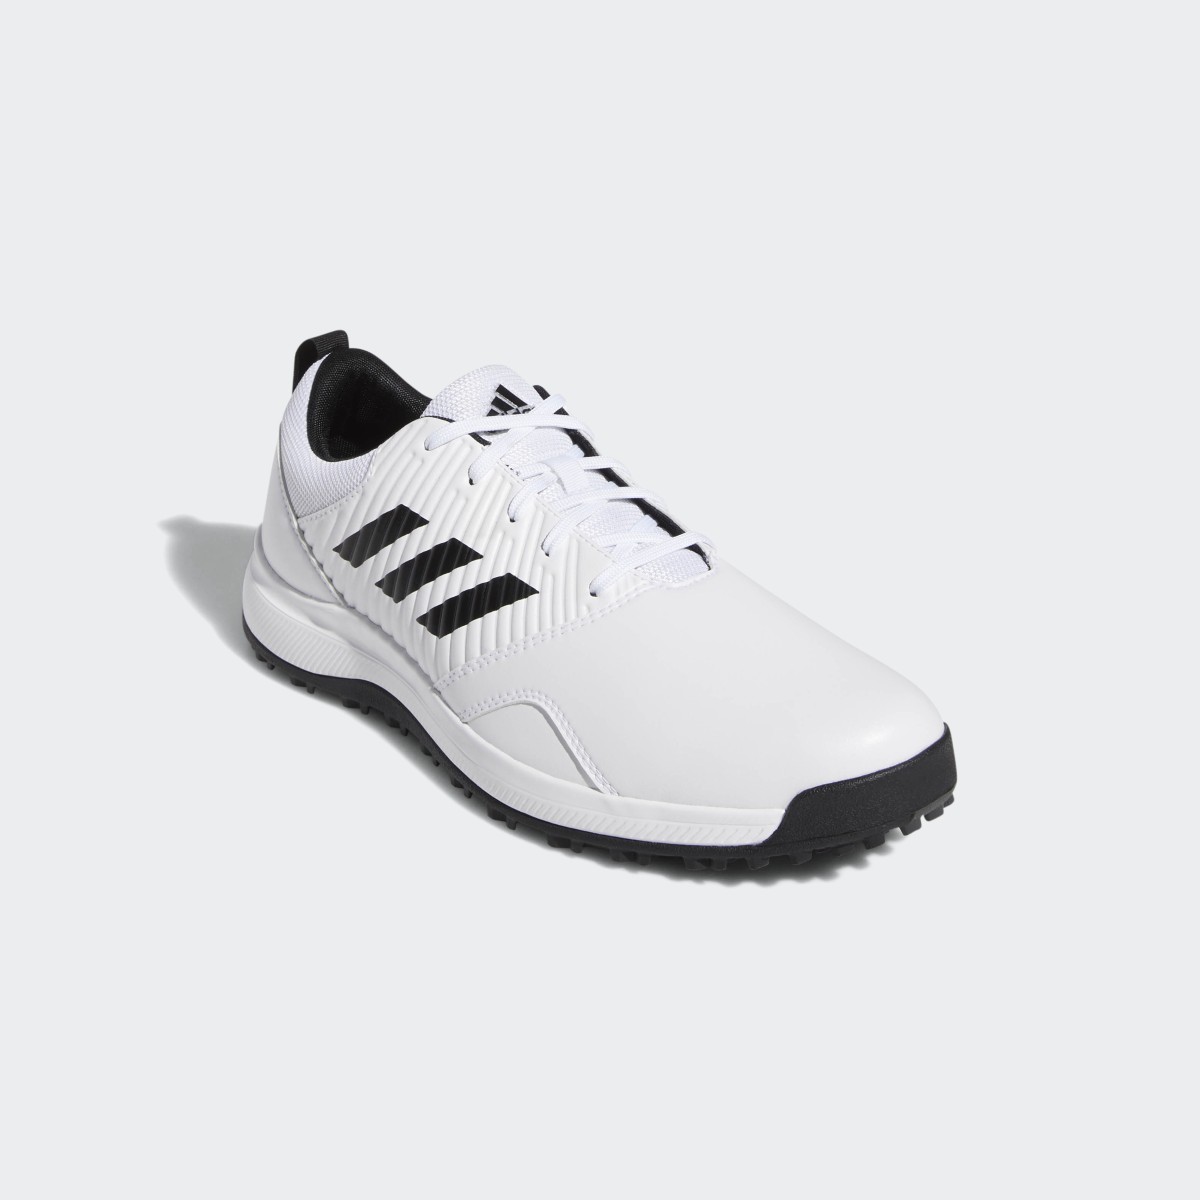 Adidas CP Traxion Spikeless Shoes. 6